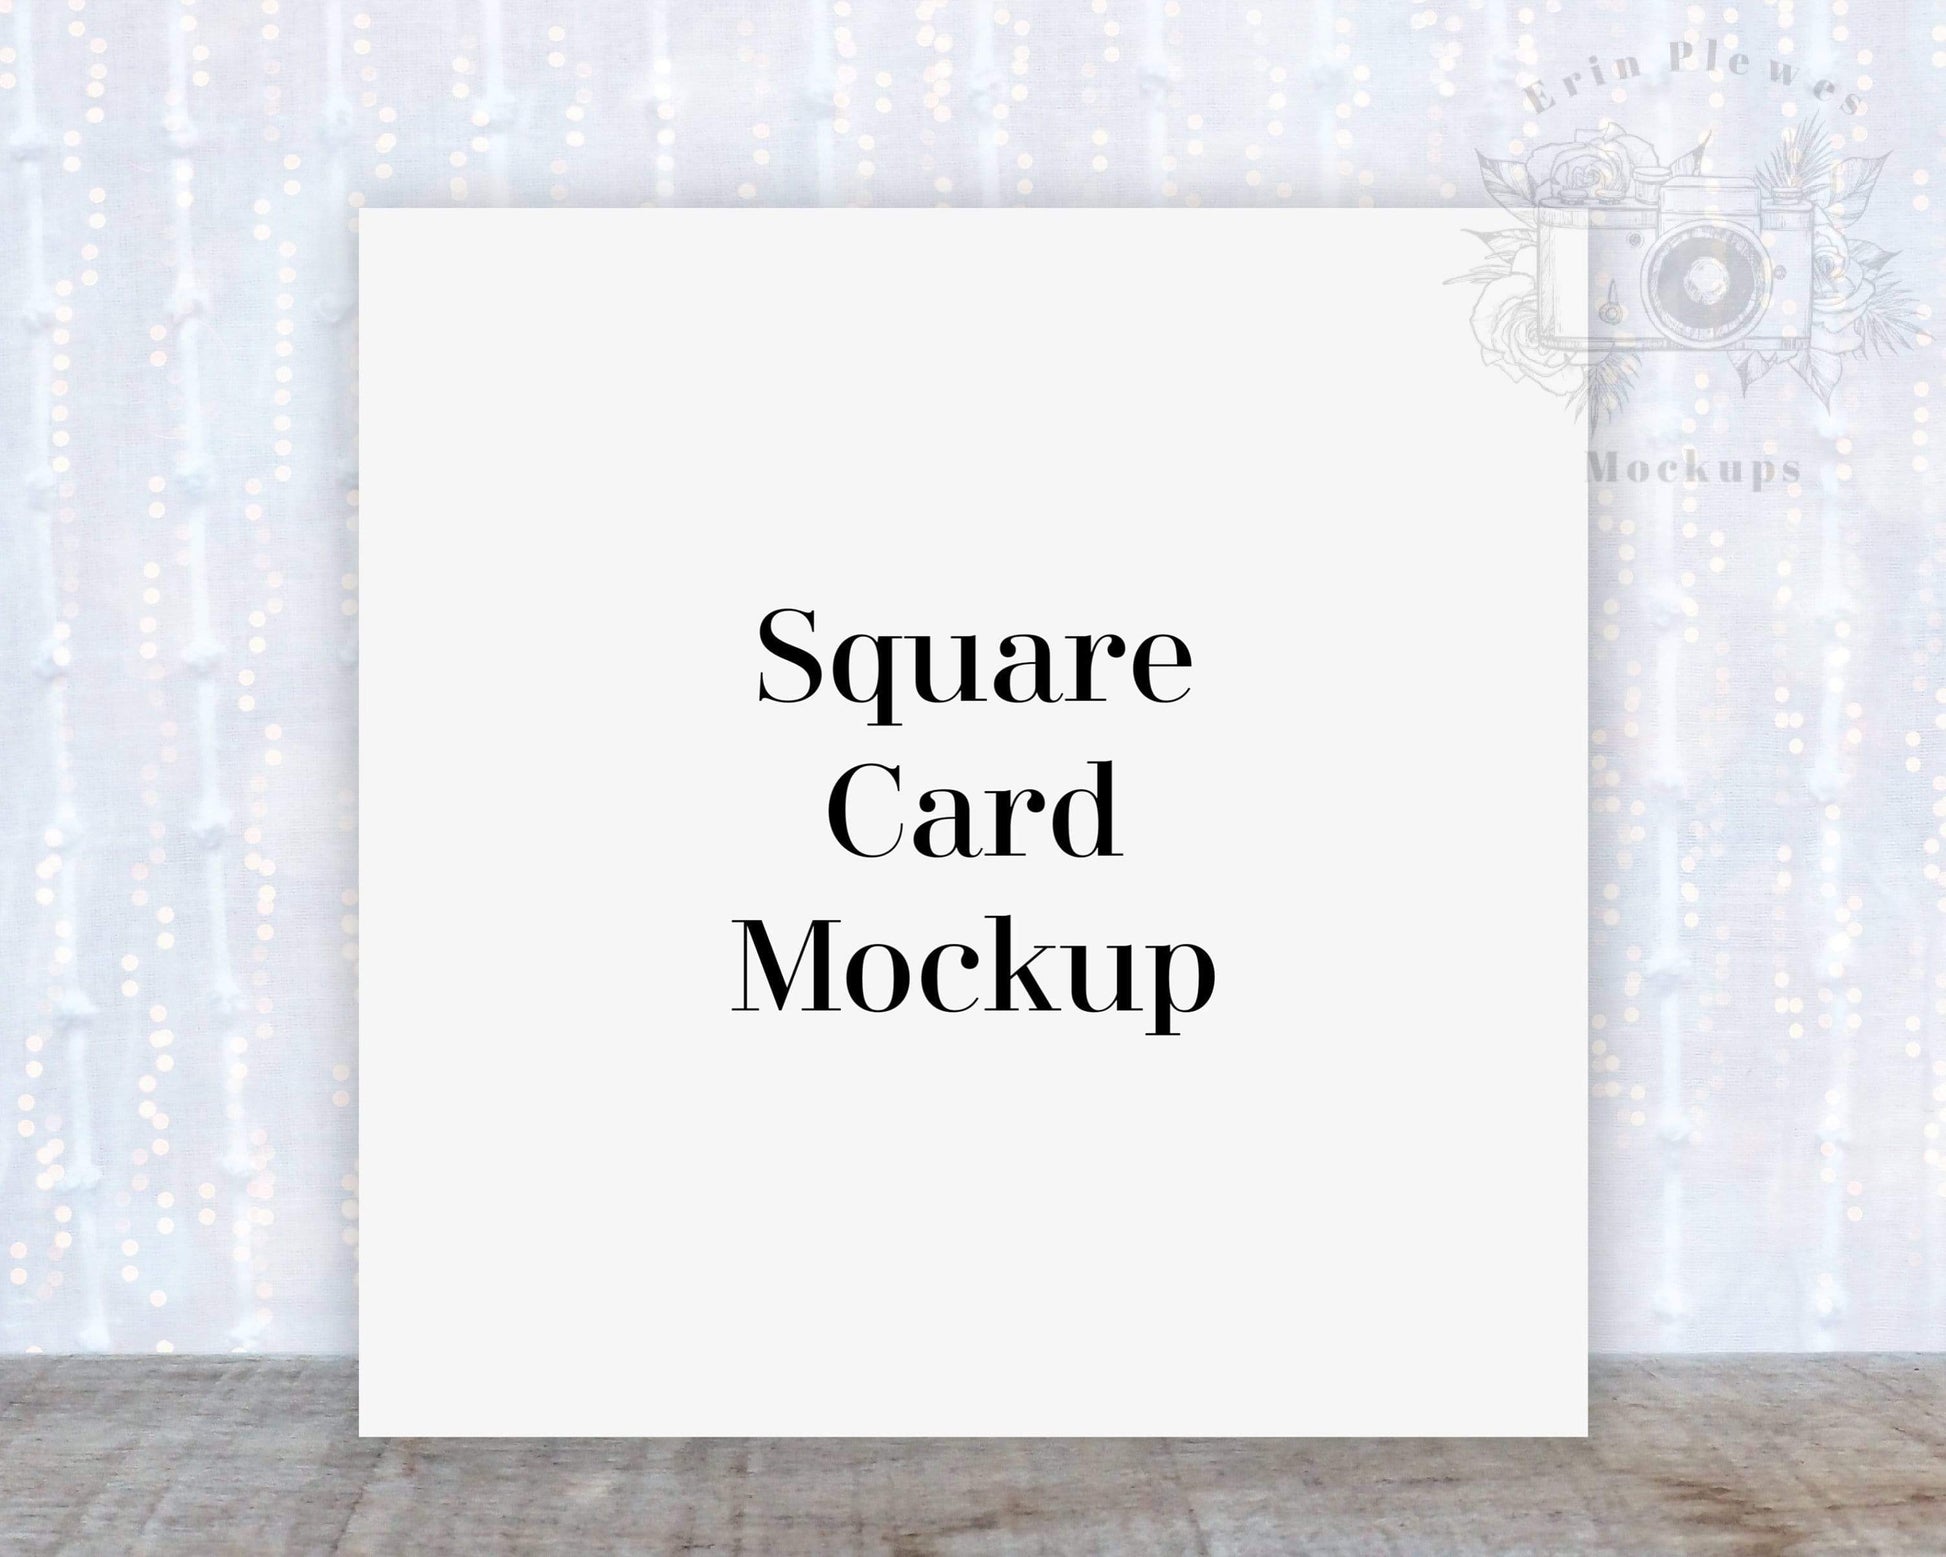 Erin Plewes Mockups Square card mockup, Greeting card mock up for rustic Wedding invitations and stationery, Jpeg Instant Digital Download Template